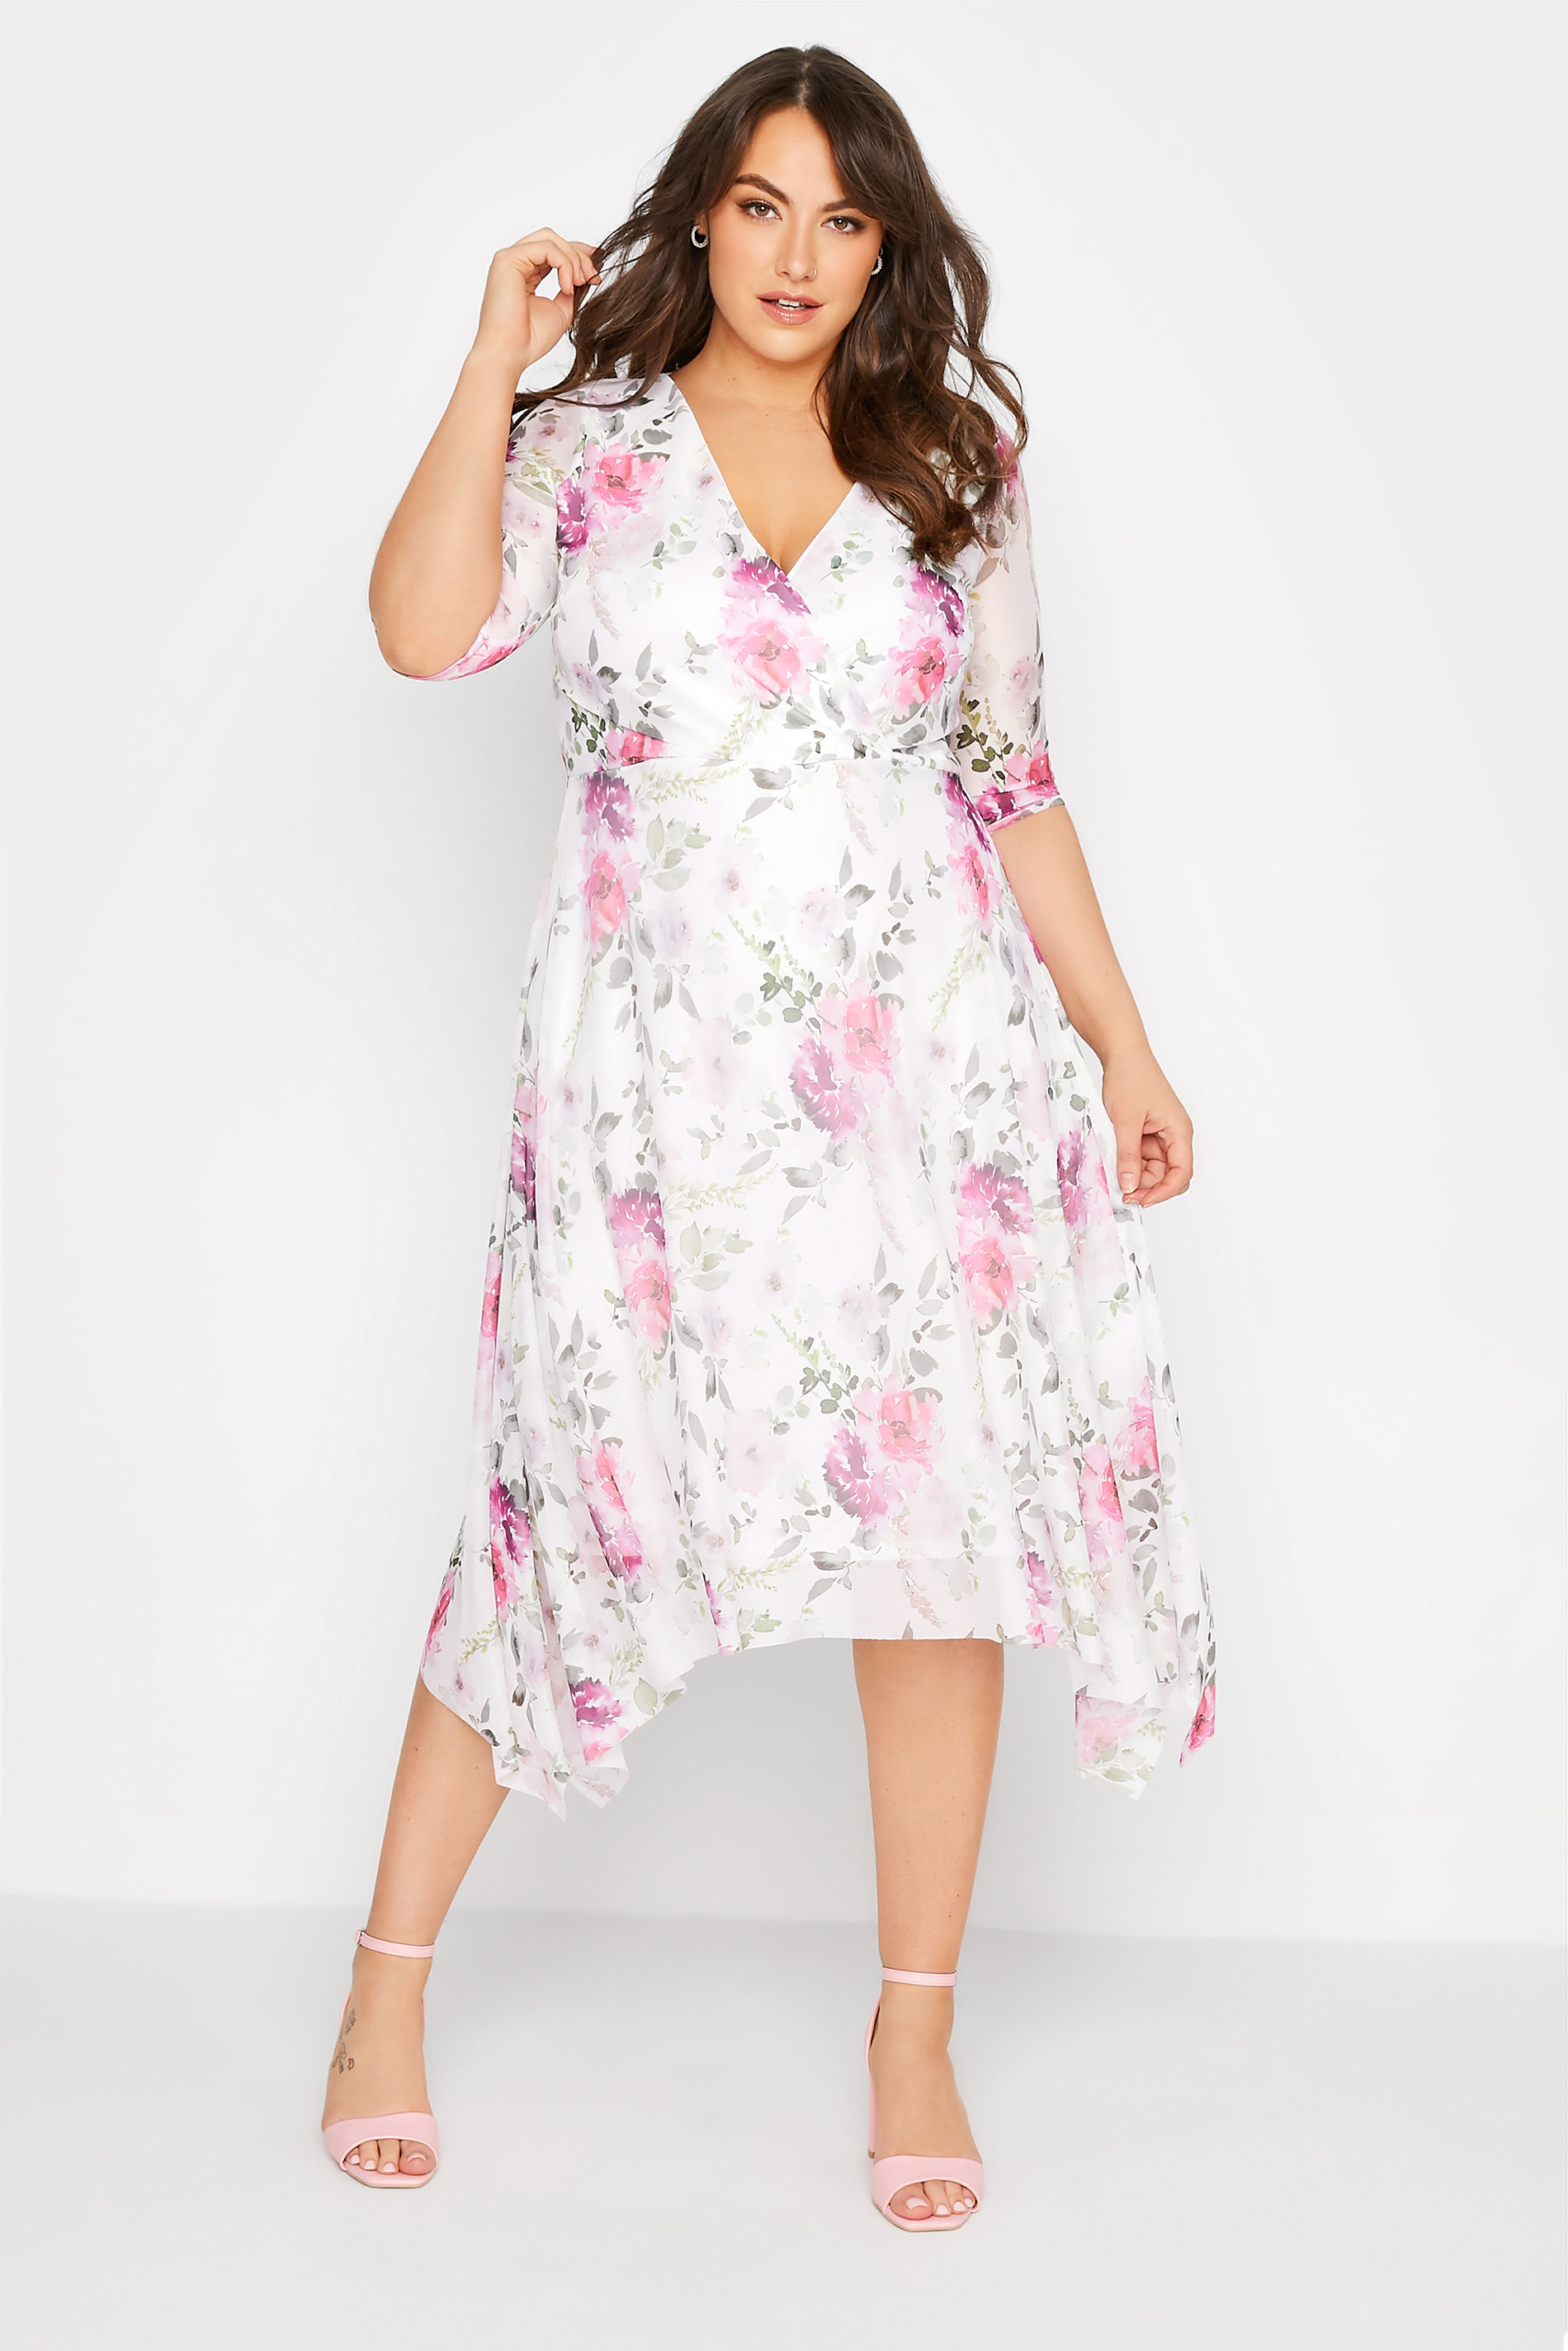 YOURS LONDON Plus Size White Floral ...